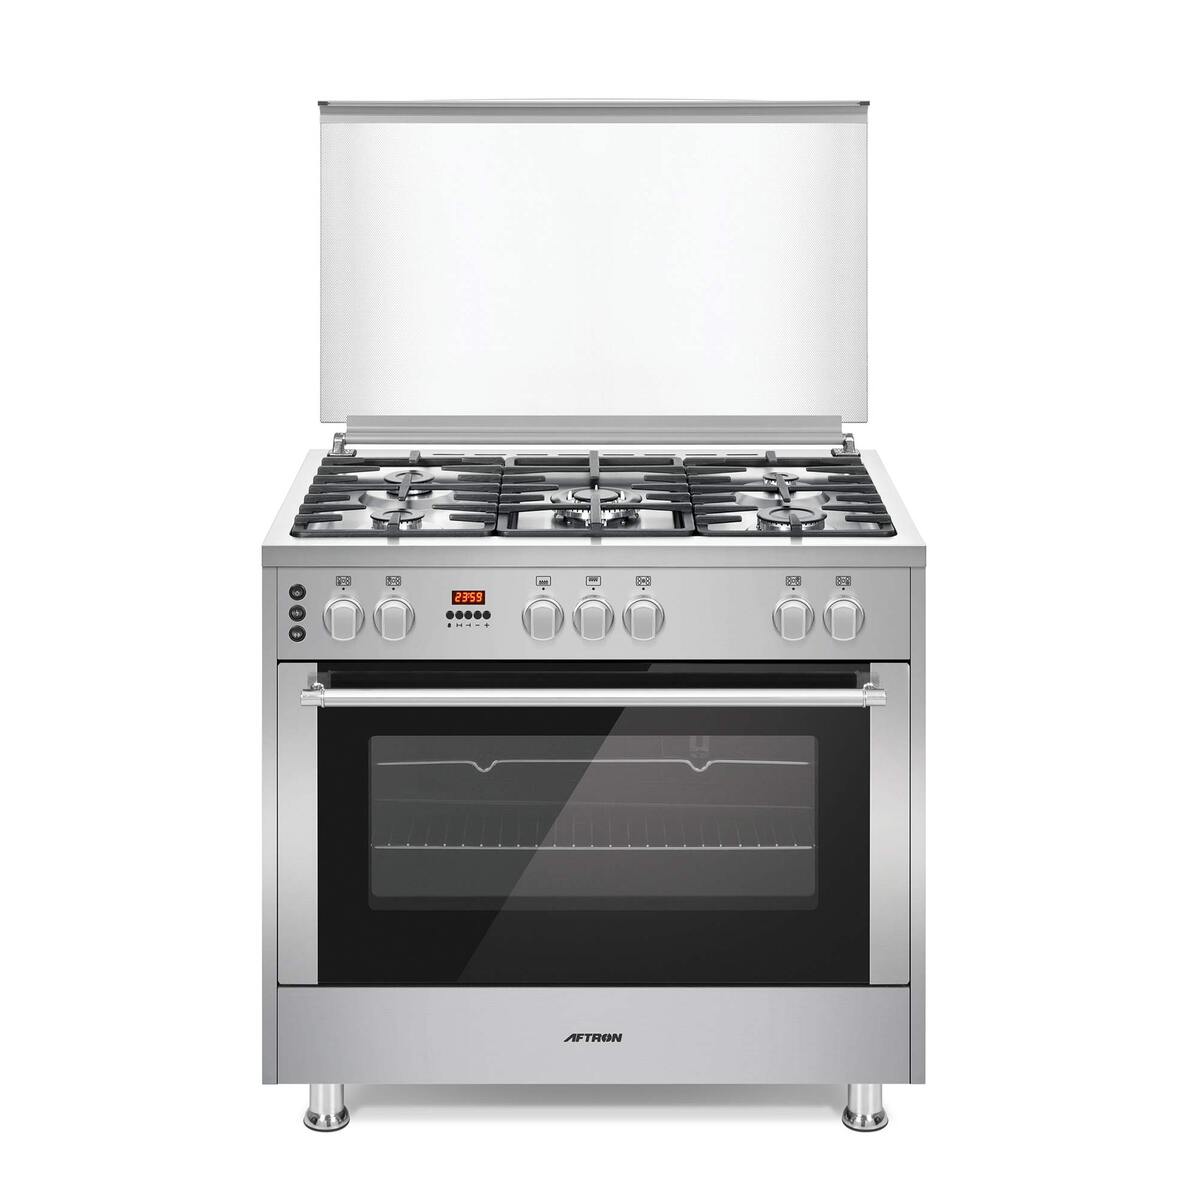 Aftron Semi Pro Cooker, 90 x 60 cm, 5 Gas Burners, Silver, AFPGR9575SSD-O